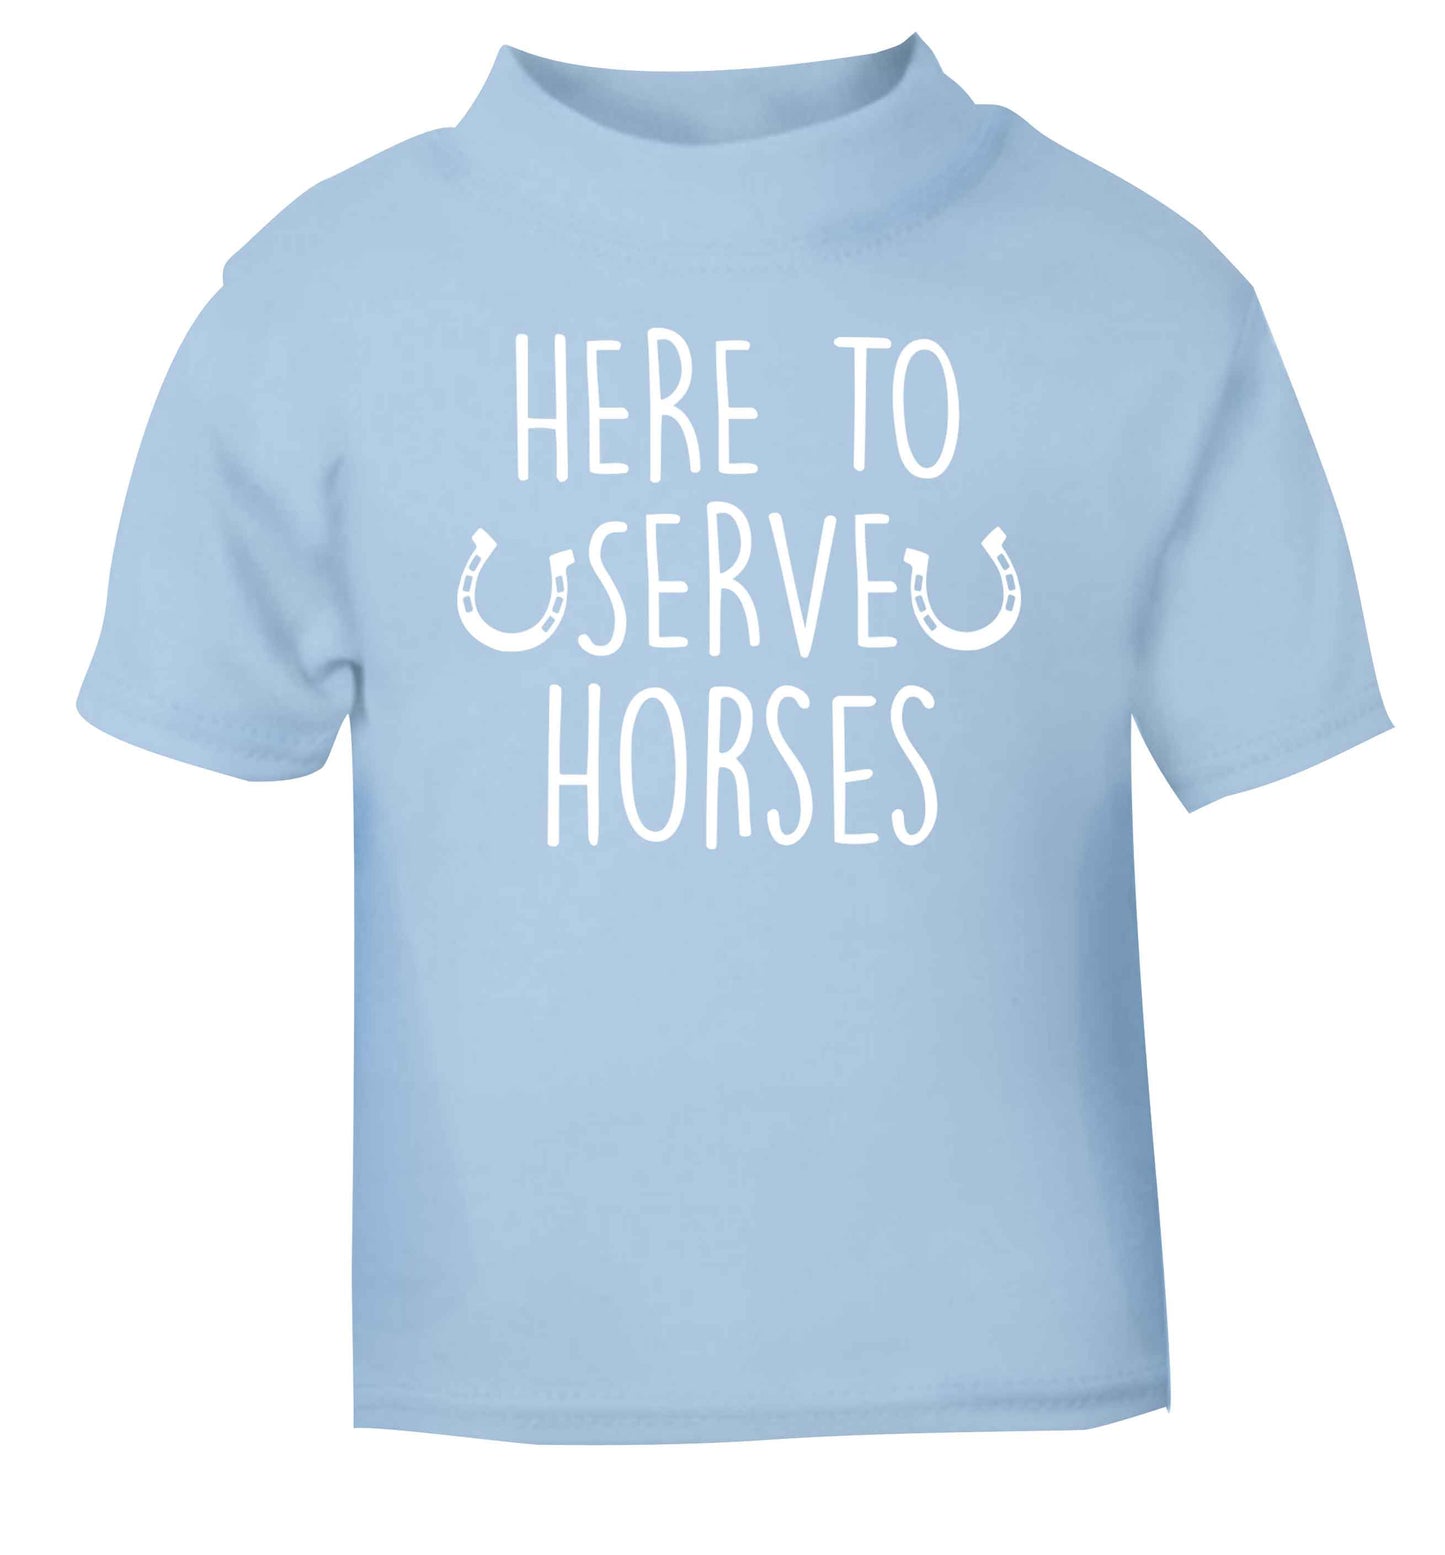 Here to serve horses light blue baby toddler Tshirt 2 Years